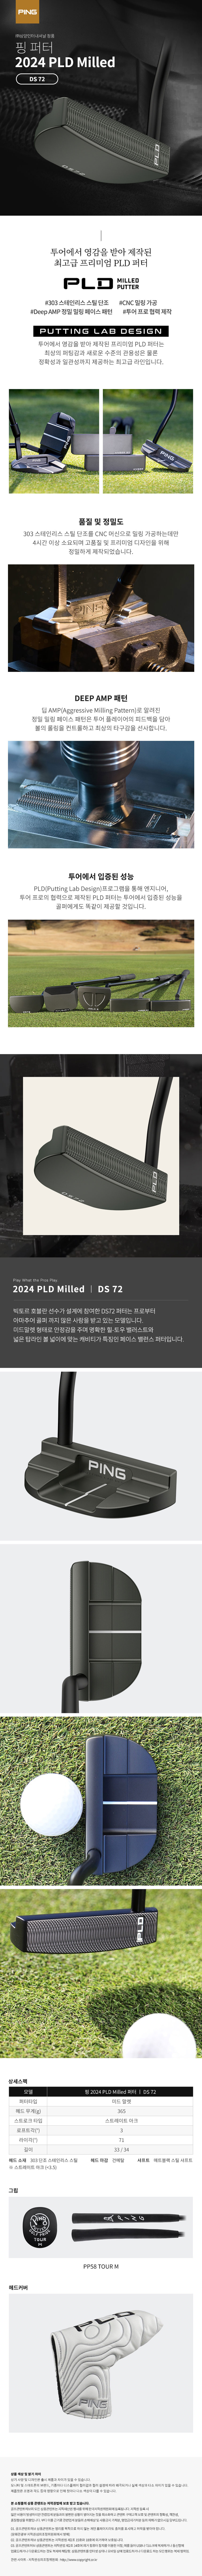 ping_milled_ds_72_putter_24.jpg